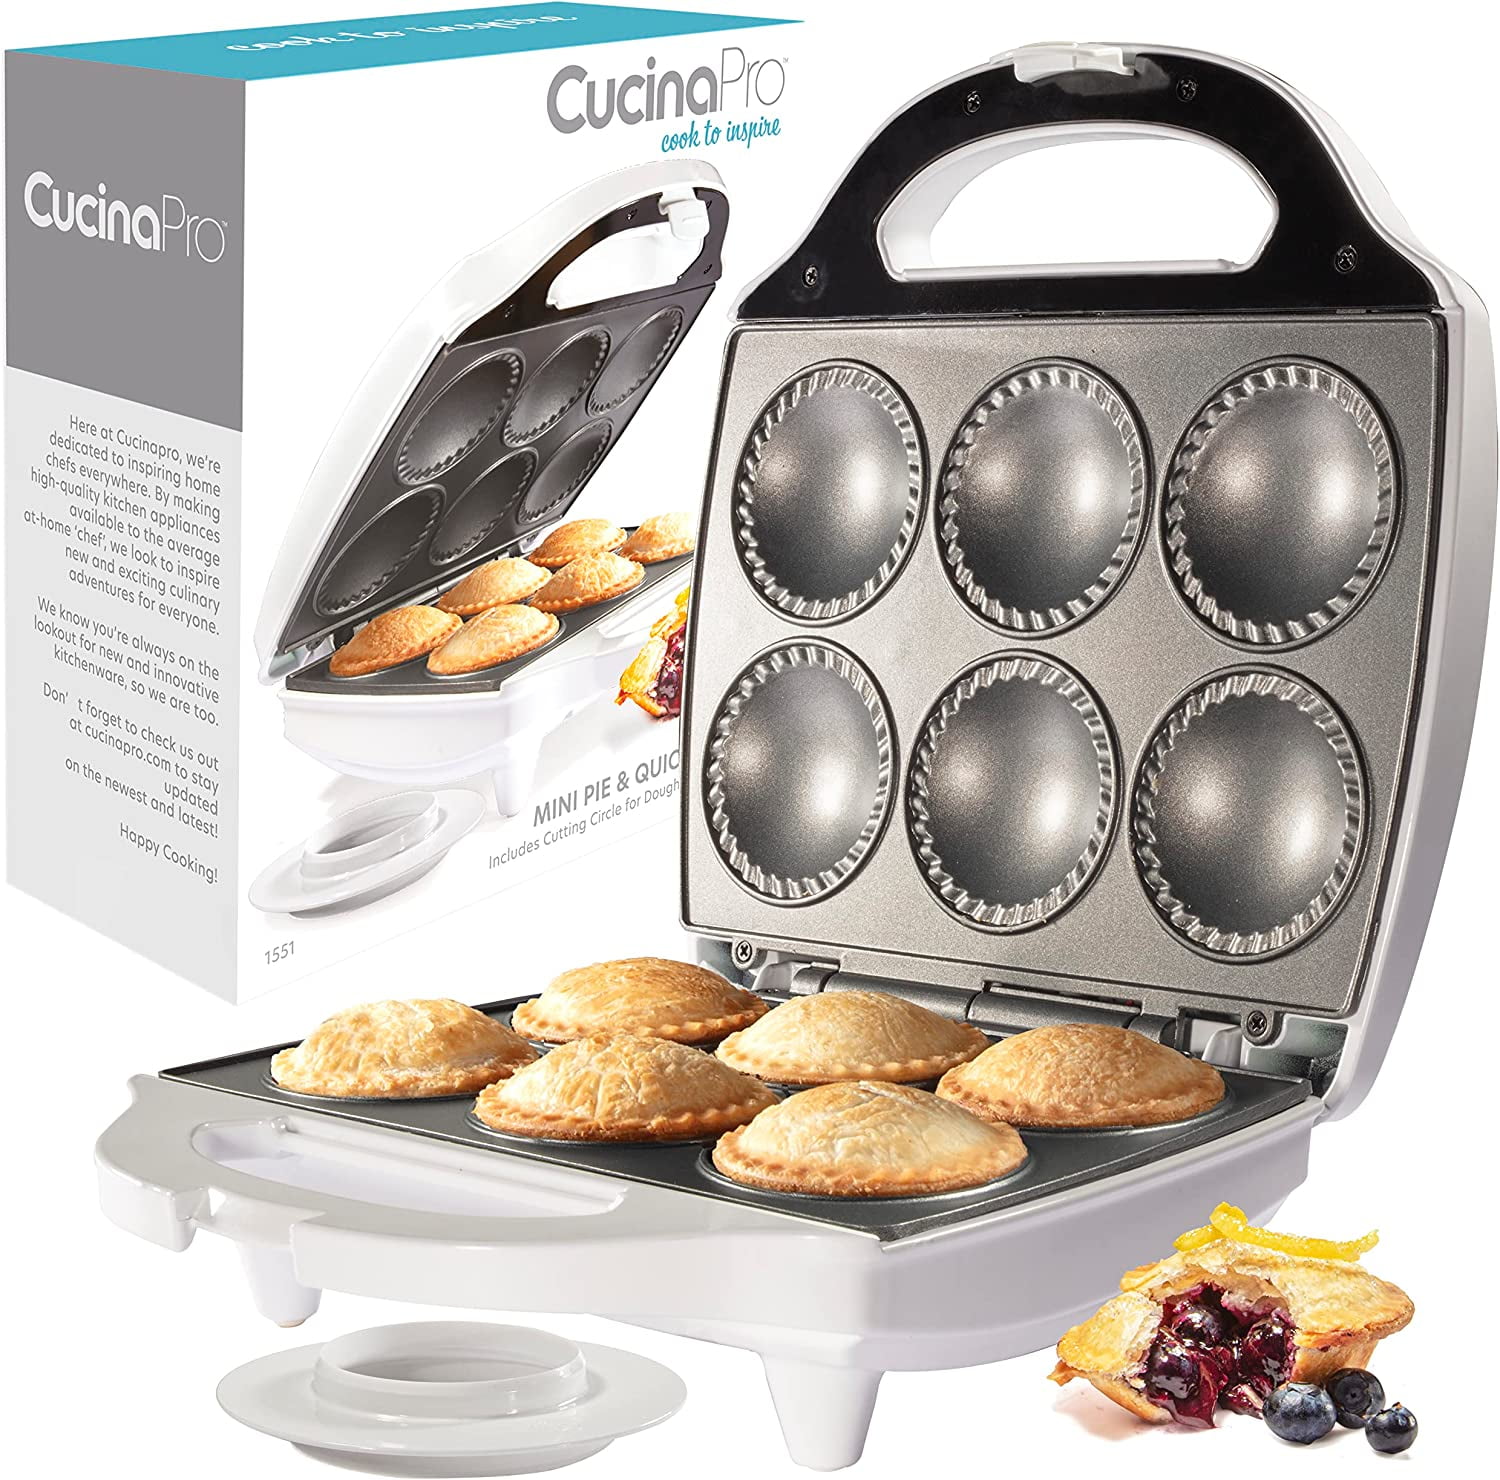 MasterChef Mini Pie and Quiche Maker- Pie Baker Cooks 6 Small Pies and  Quiches in Minutes- Non-stick Cooker w Dough Cutting Circle for Easy Dough